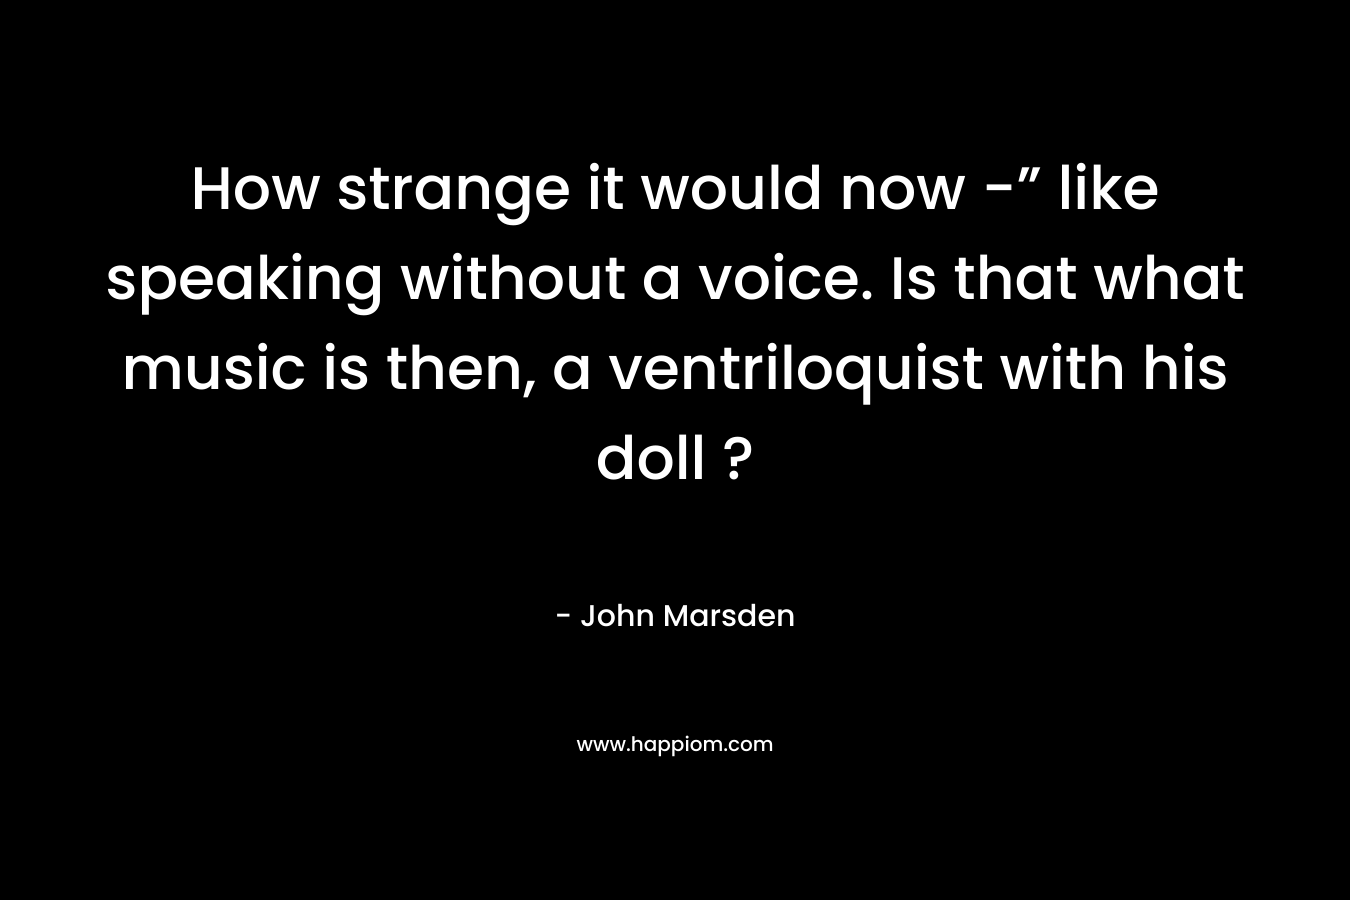 How strange it would now -” like speaking without a voice. Is that what music is then, a ventriloquist with his doll ?